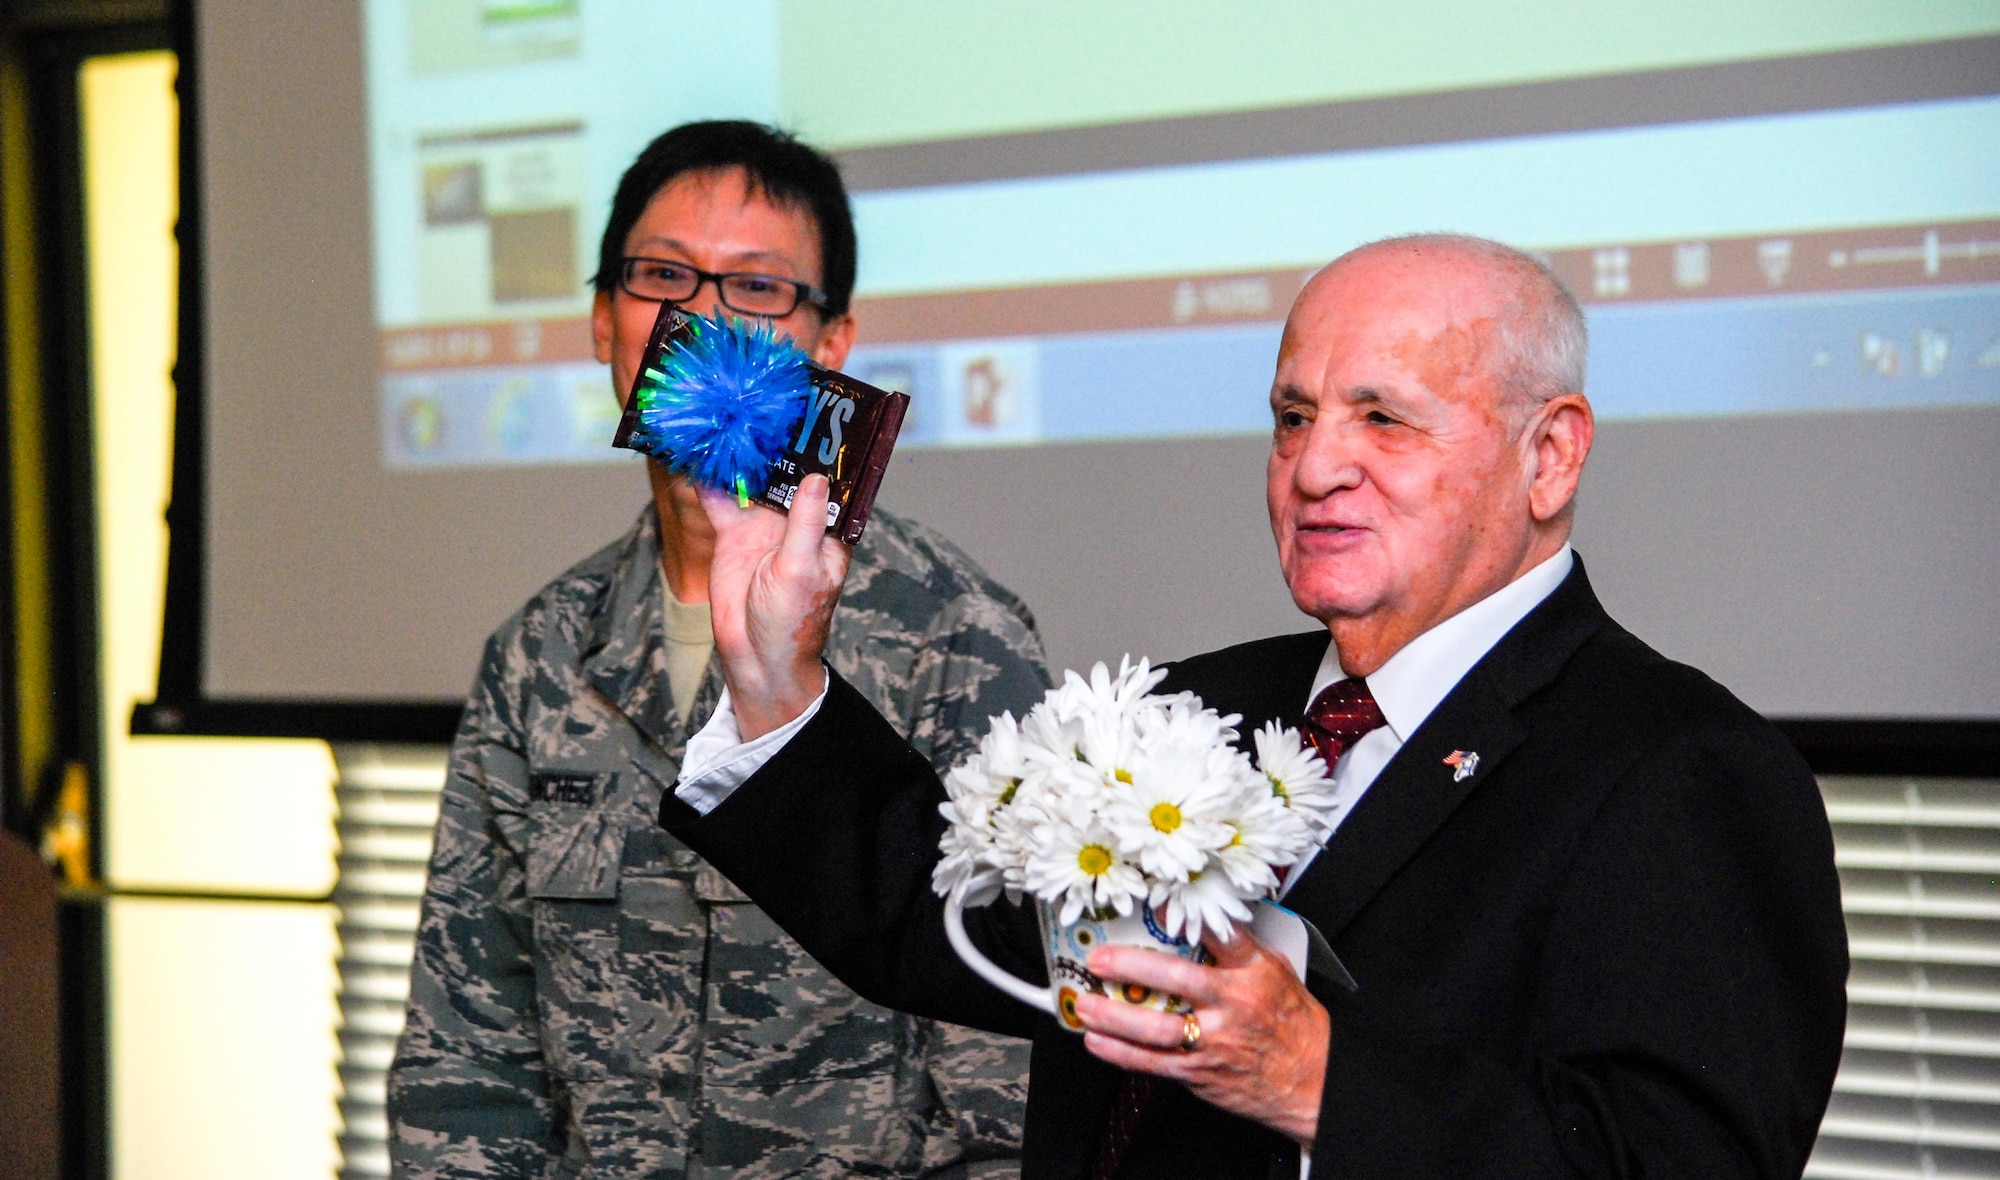 Dobbins Airmen gathered at Verhulst Hall, May 14, 2016, to listen to Hershel Greenblat speak about his Holocaust survival during World War II. (U.S. Air Force photo/Tech. Sgt. Kelly Goonan)